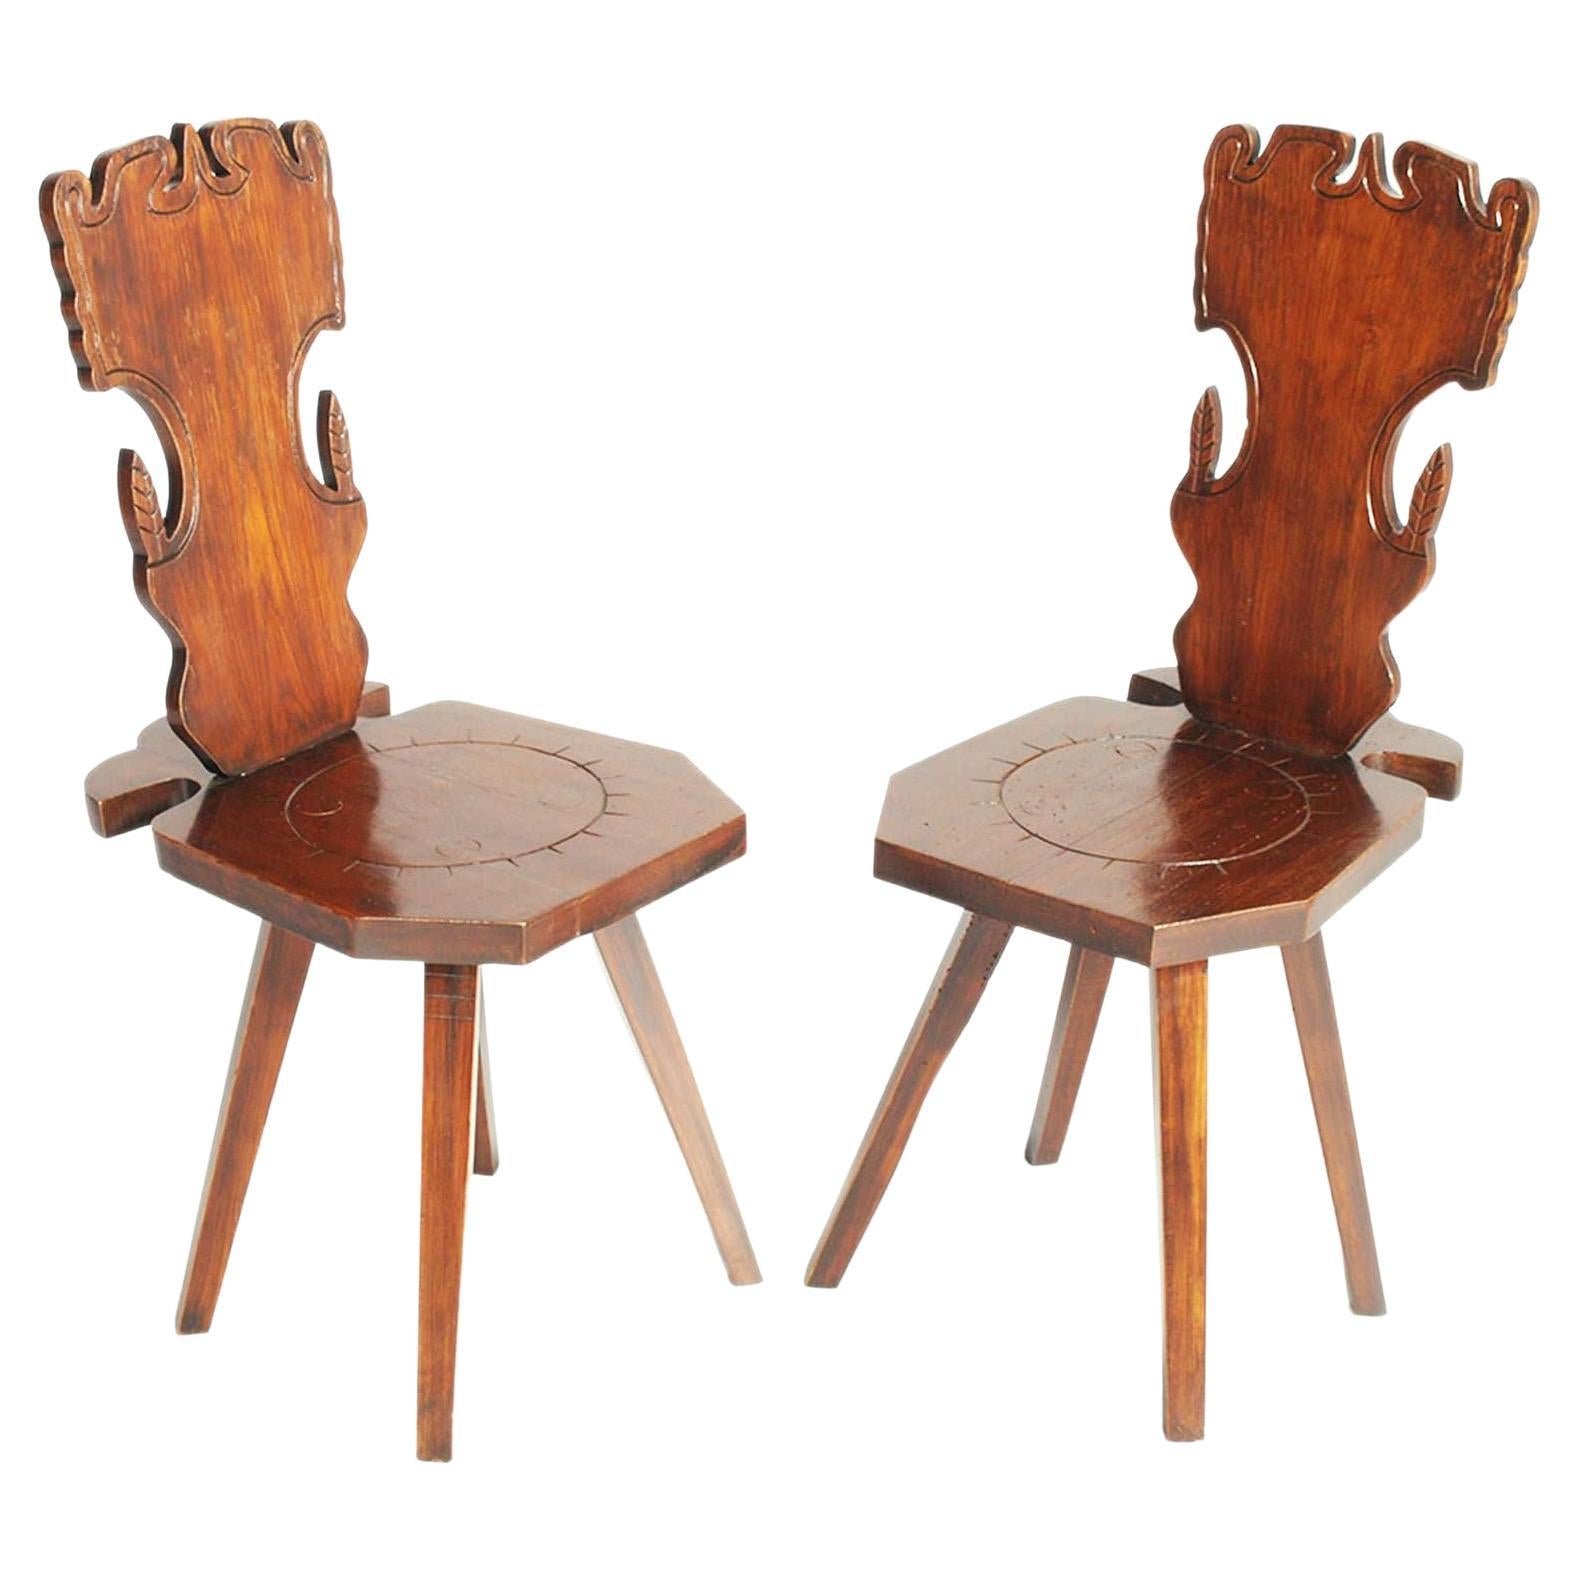 Early 1900s Pair Antique Tyrolean Stool Chair in Hand-Carved Walnut Wax Polished